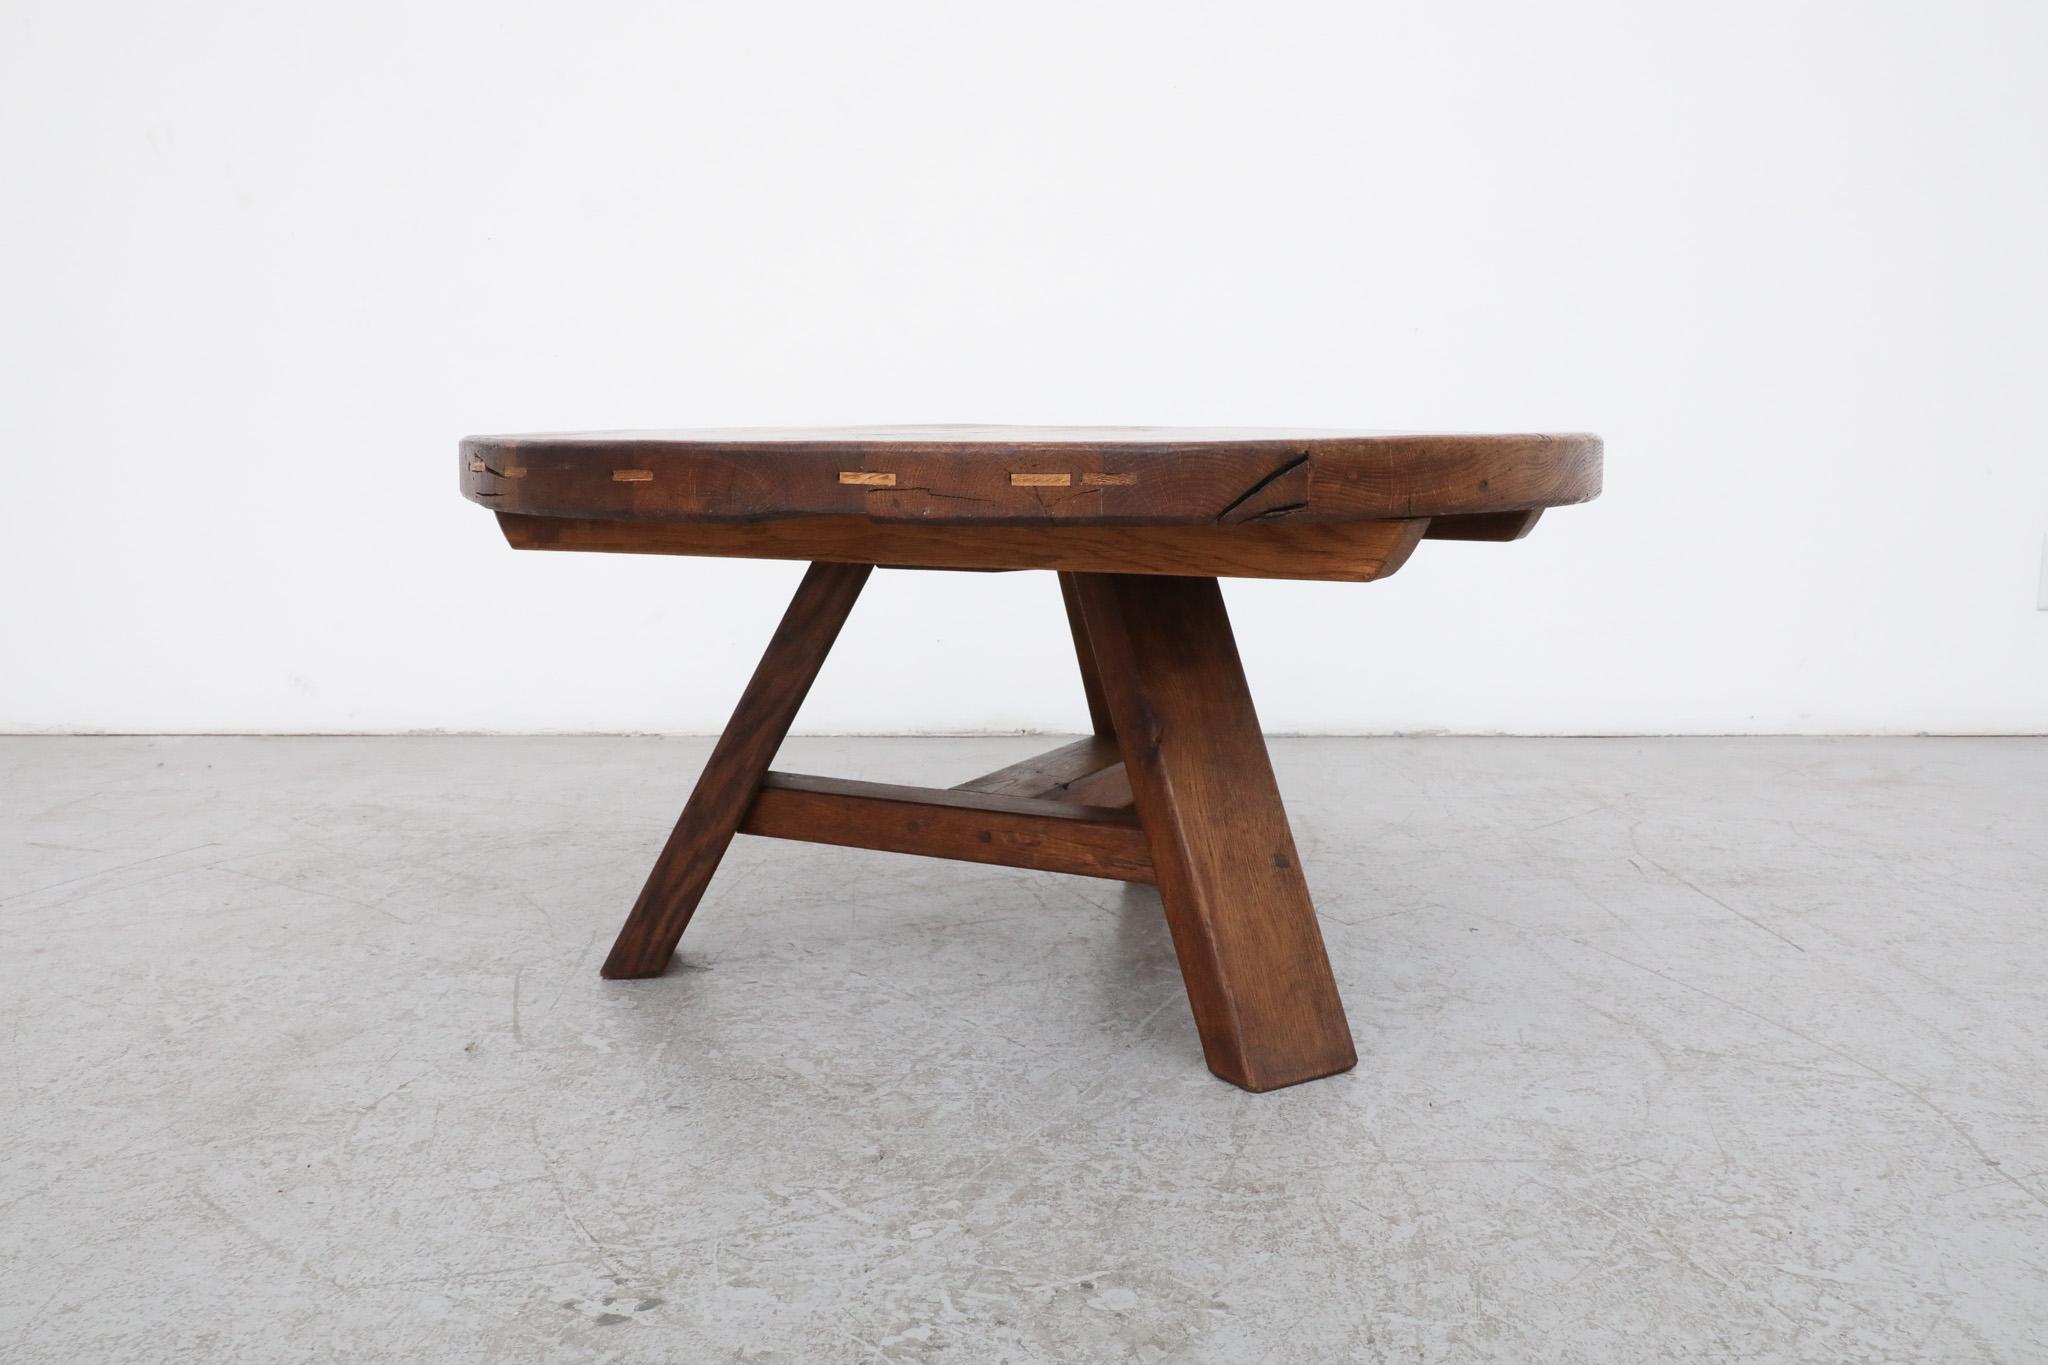 Dutch Stunning Pierre Chapo inspired Brutalist Round Oak Coffee Table with Trestle Bas